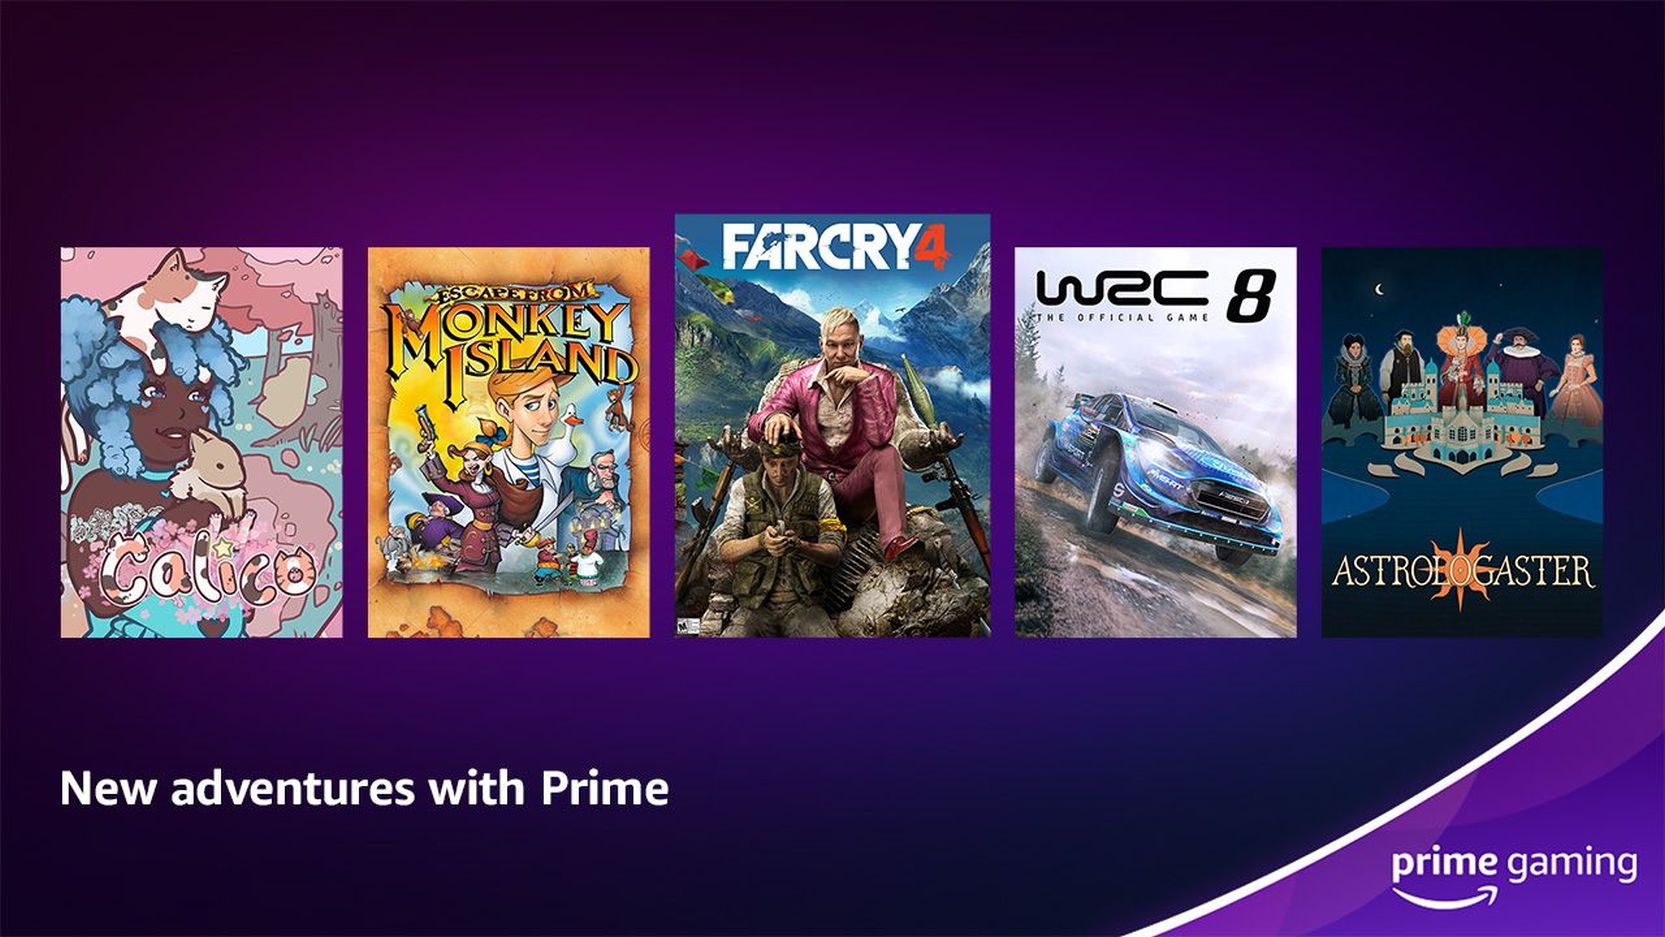 Image for Prime Gaming June highlights include Far Cry 4 and Escape from Monkey Island